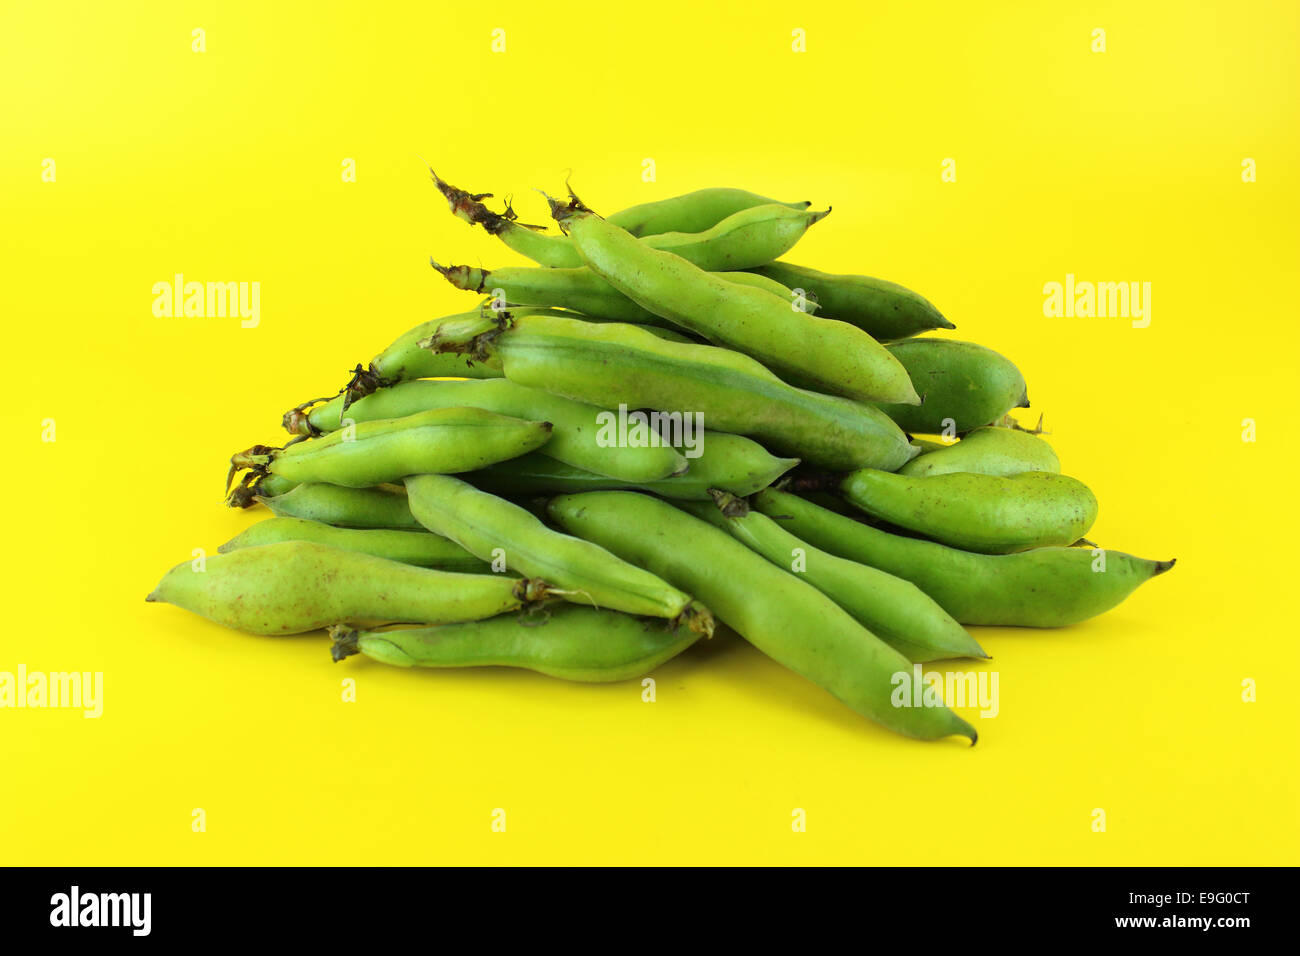 broad bean pods and beans Stock Photo